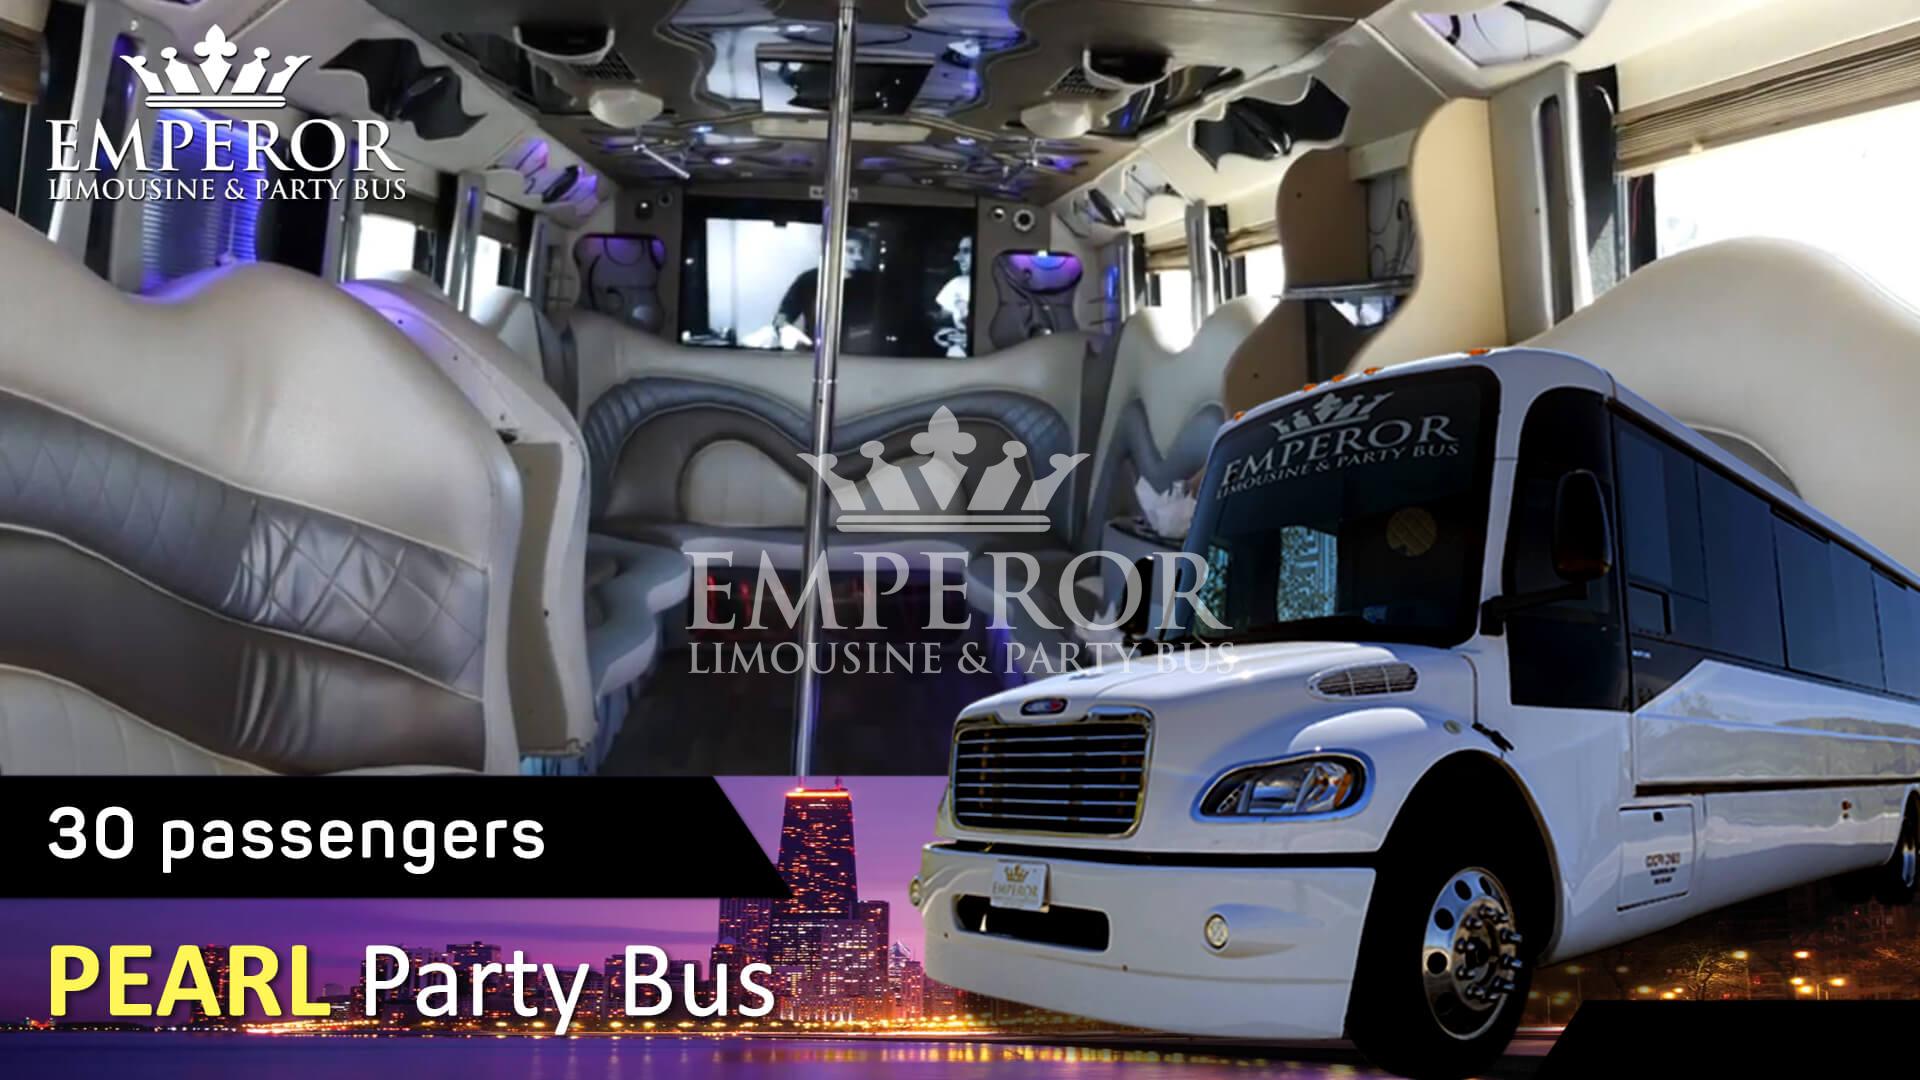 Algonquin party bus services - Pearl Edition